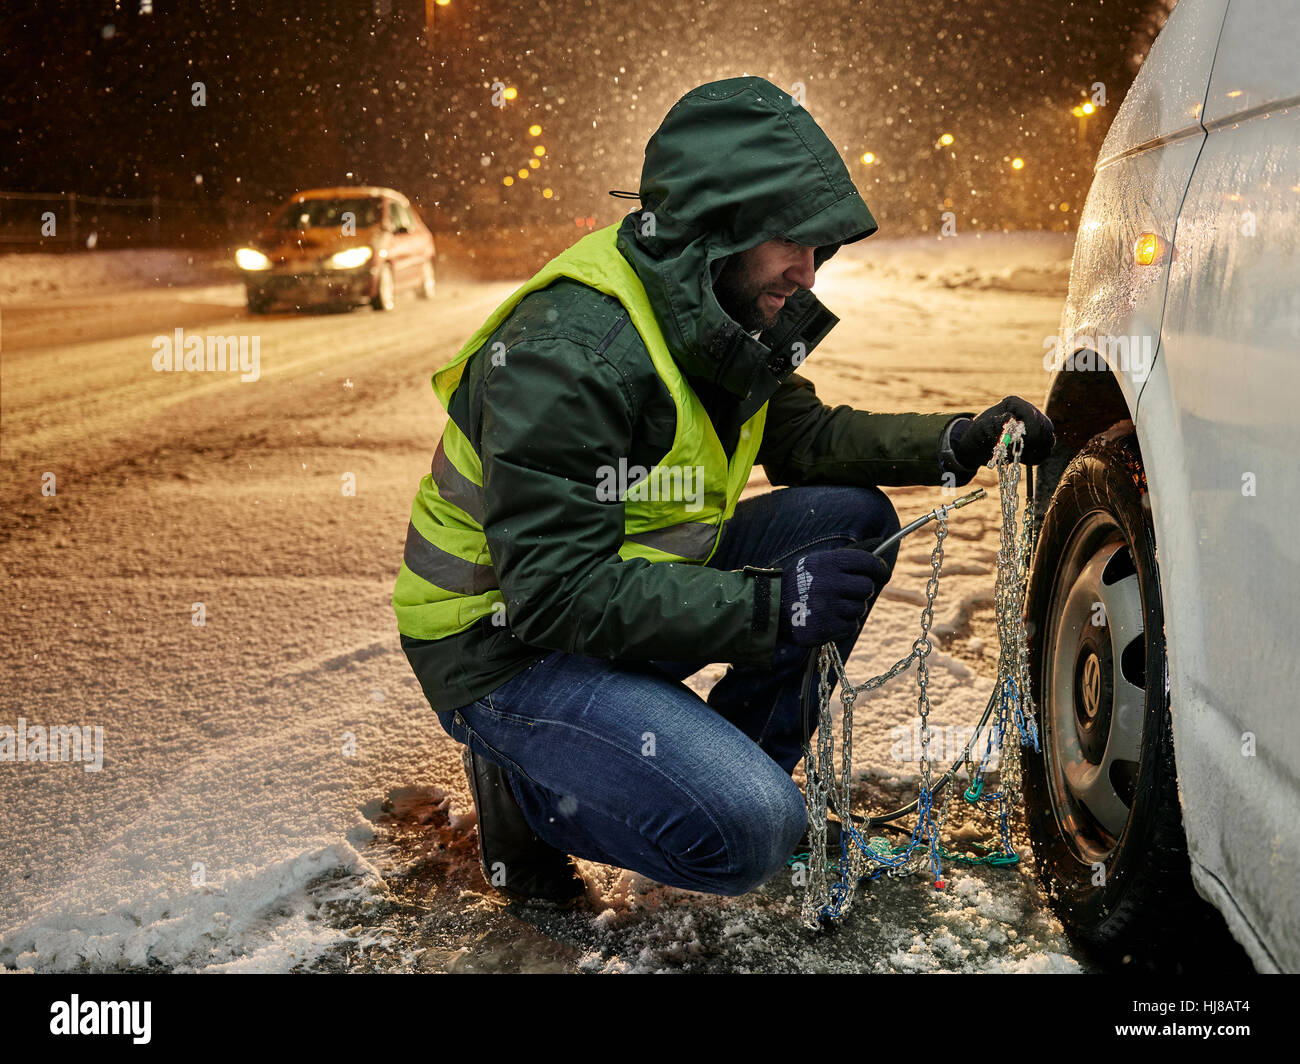 Man with safety vest applying snow chains on snow-covered road, Wattens, Tyrol, Austria Stock Photo